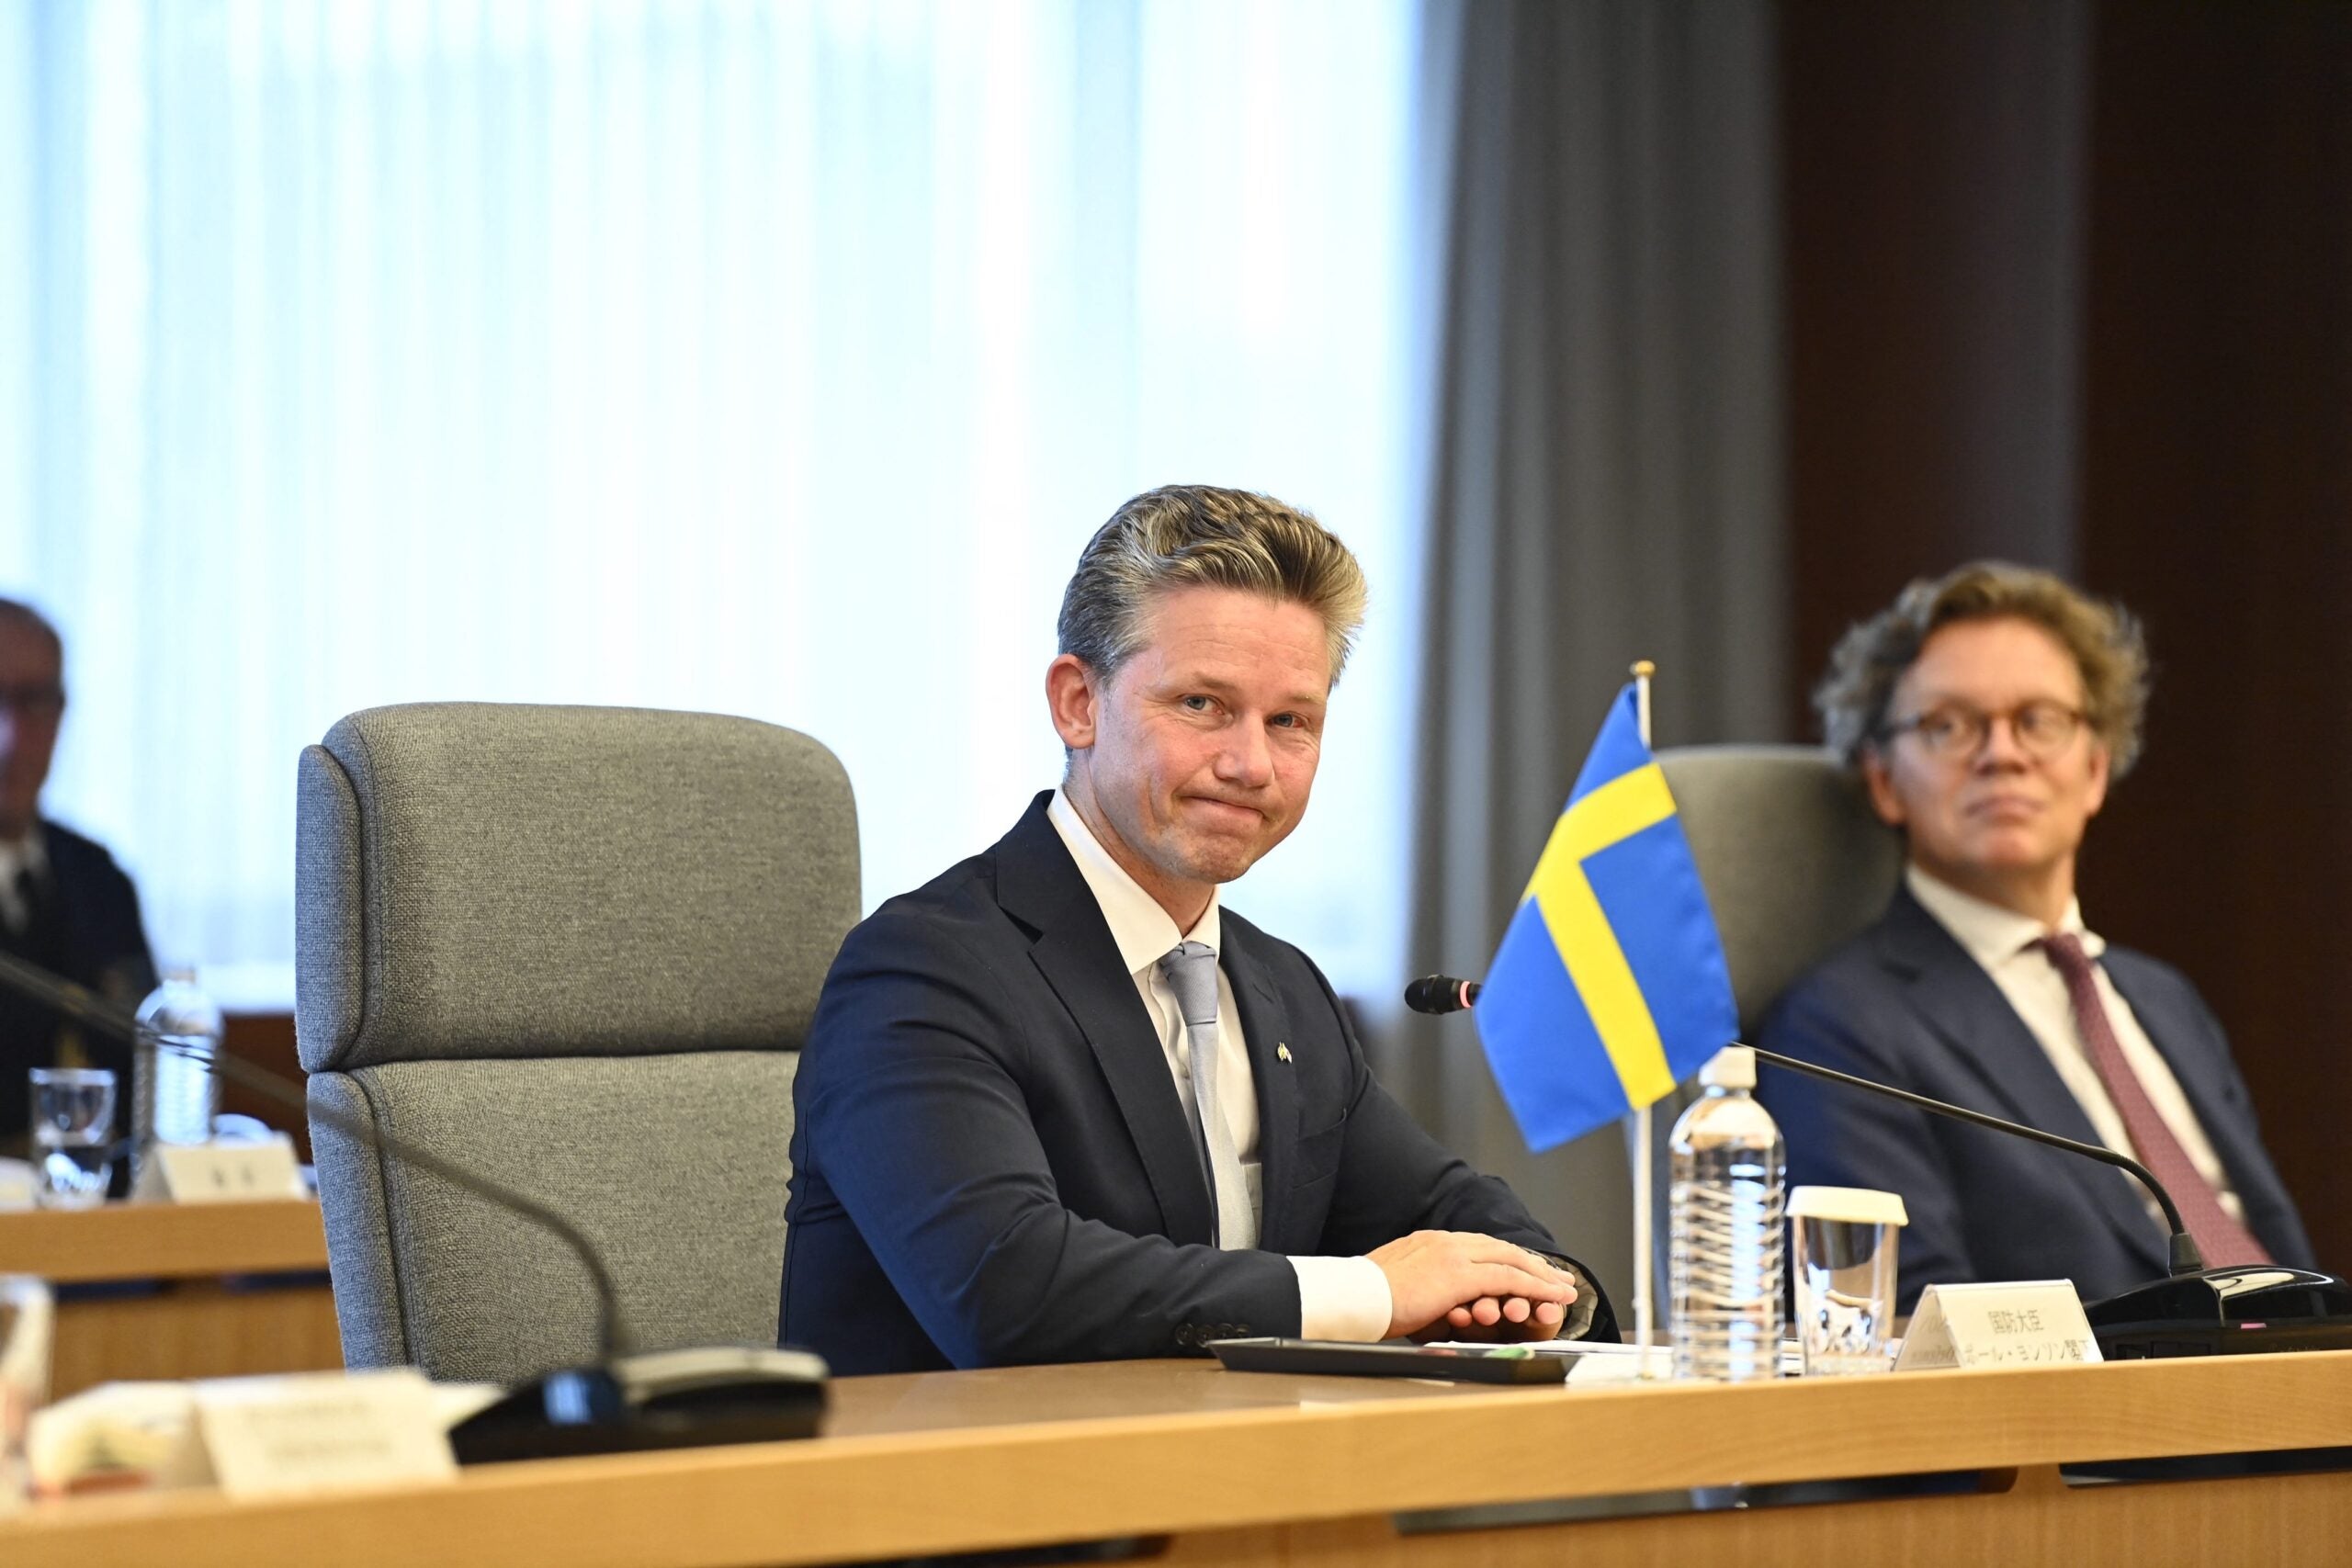 Swedish Defense Minister Pal Jonson (C) listens to Japanese Defense Minister Yasukazu Hamada (not pictured) during their Japan-Sweden bilateral meeting at the Japanese defense ministry in Tokyo on June 7, 2023. (Photo by David Mareuil / POOL / AFP) (Photo by DAVID MAREUIL/POOL/AFP via Getty Images)